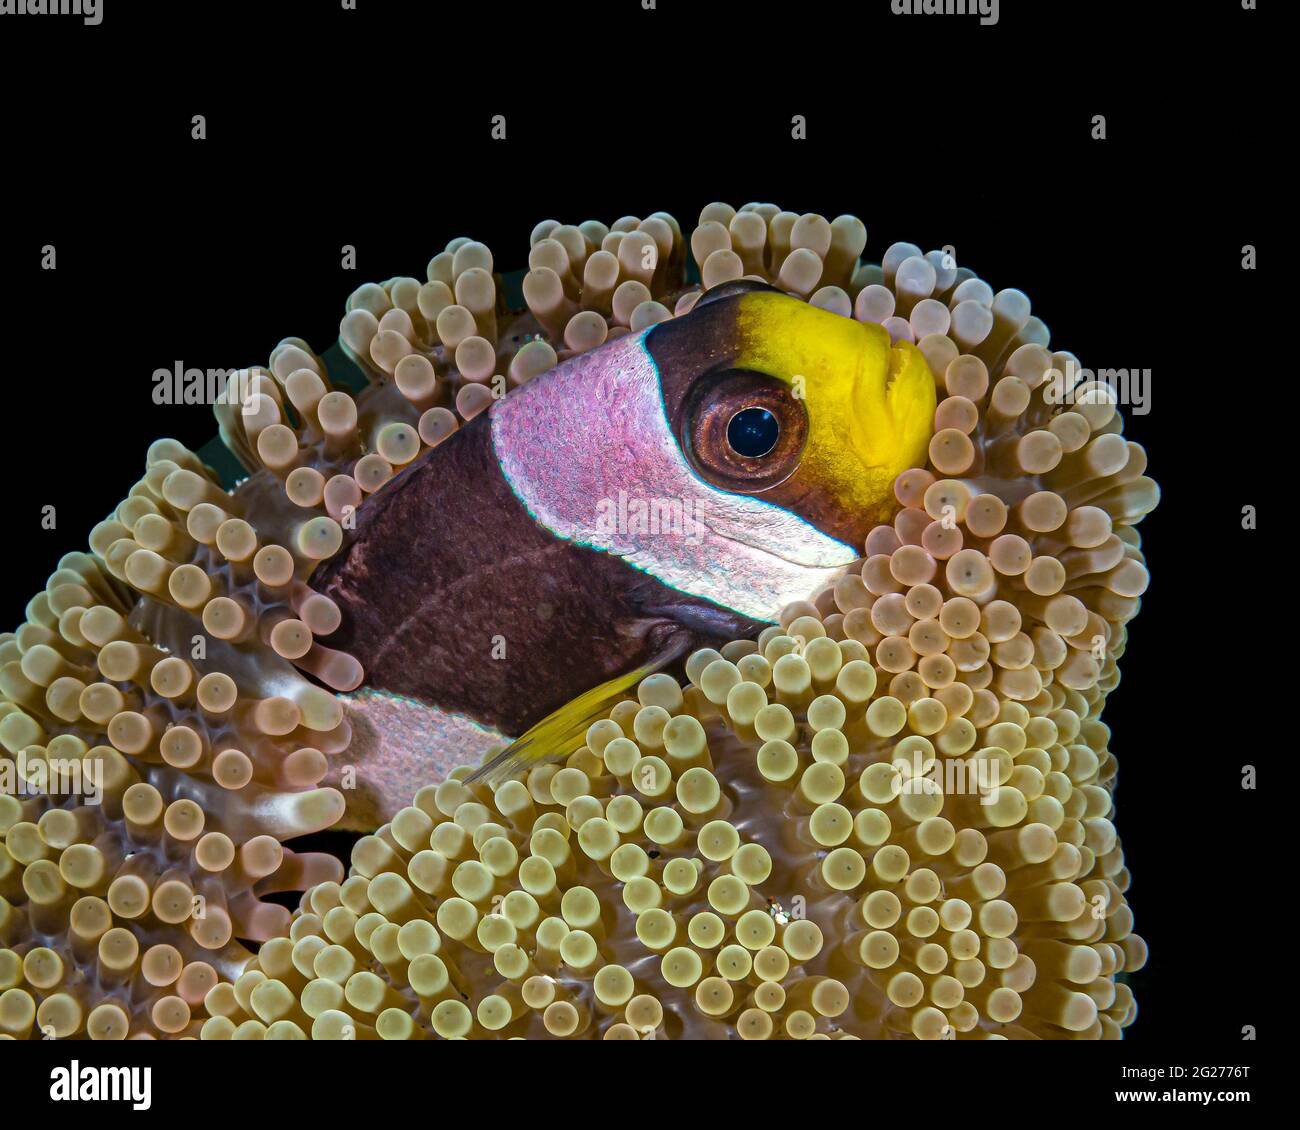 Clark's anemonefish (Amphiprion clarkii) in its anemone. Stock Photo